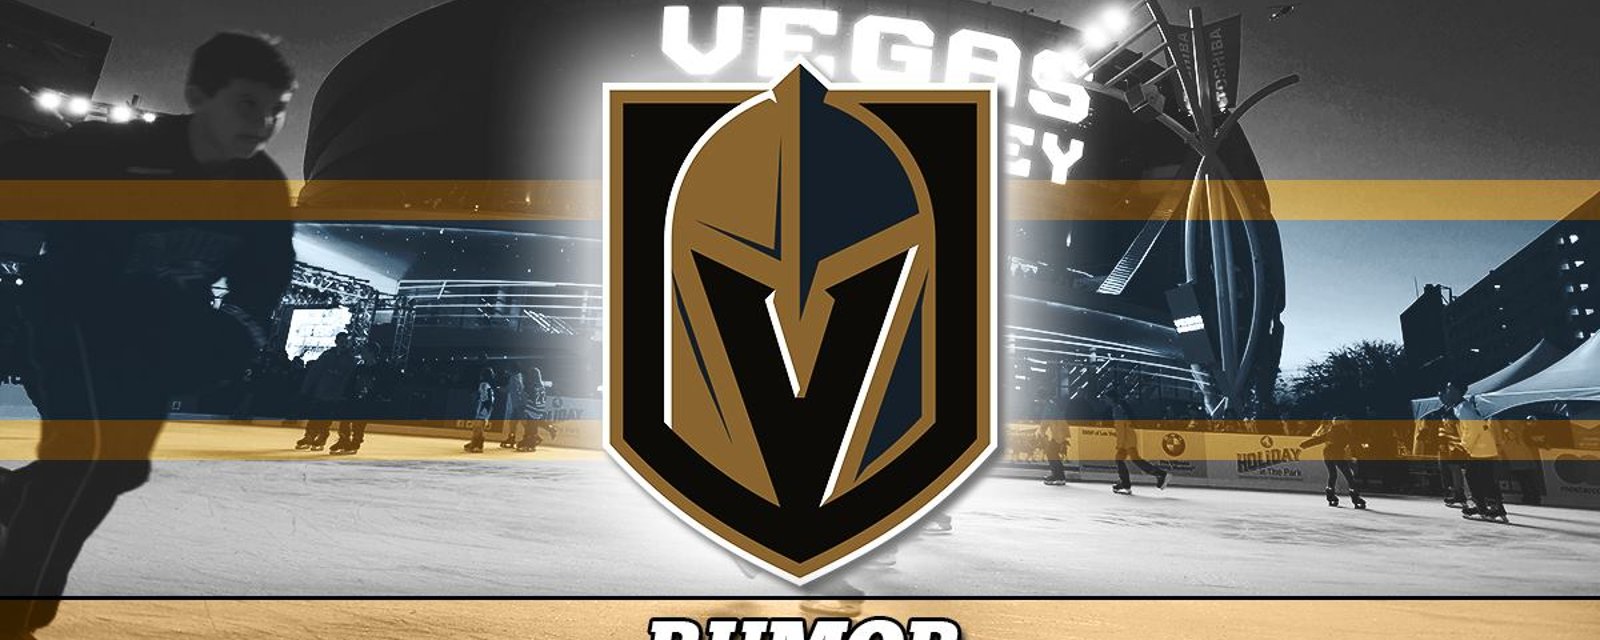 Early prediction of what Las Vegas' team could look like this summer.